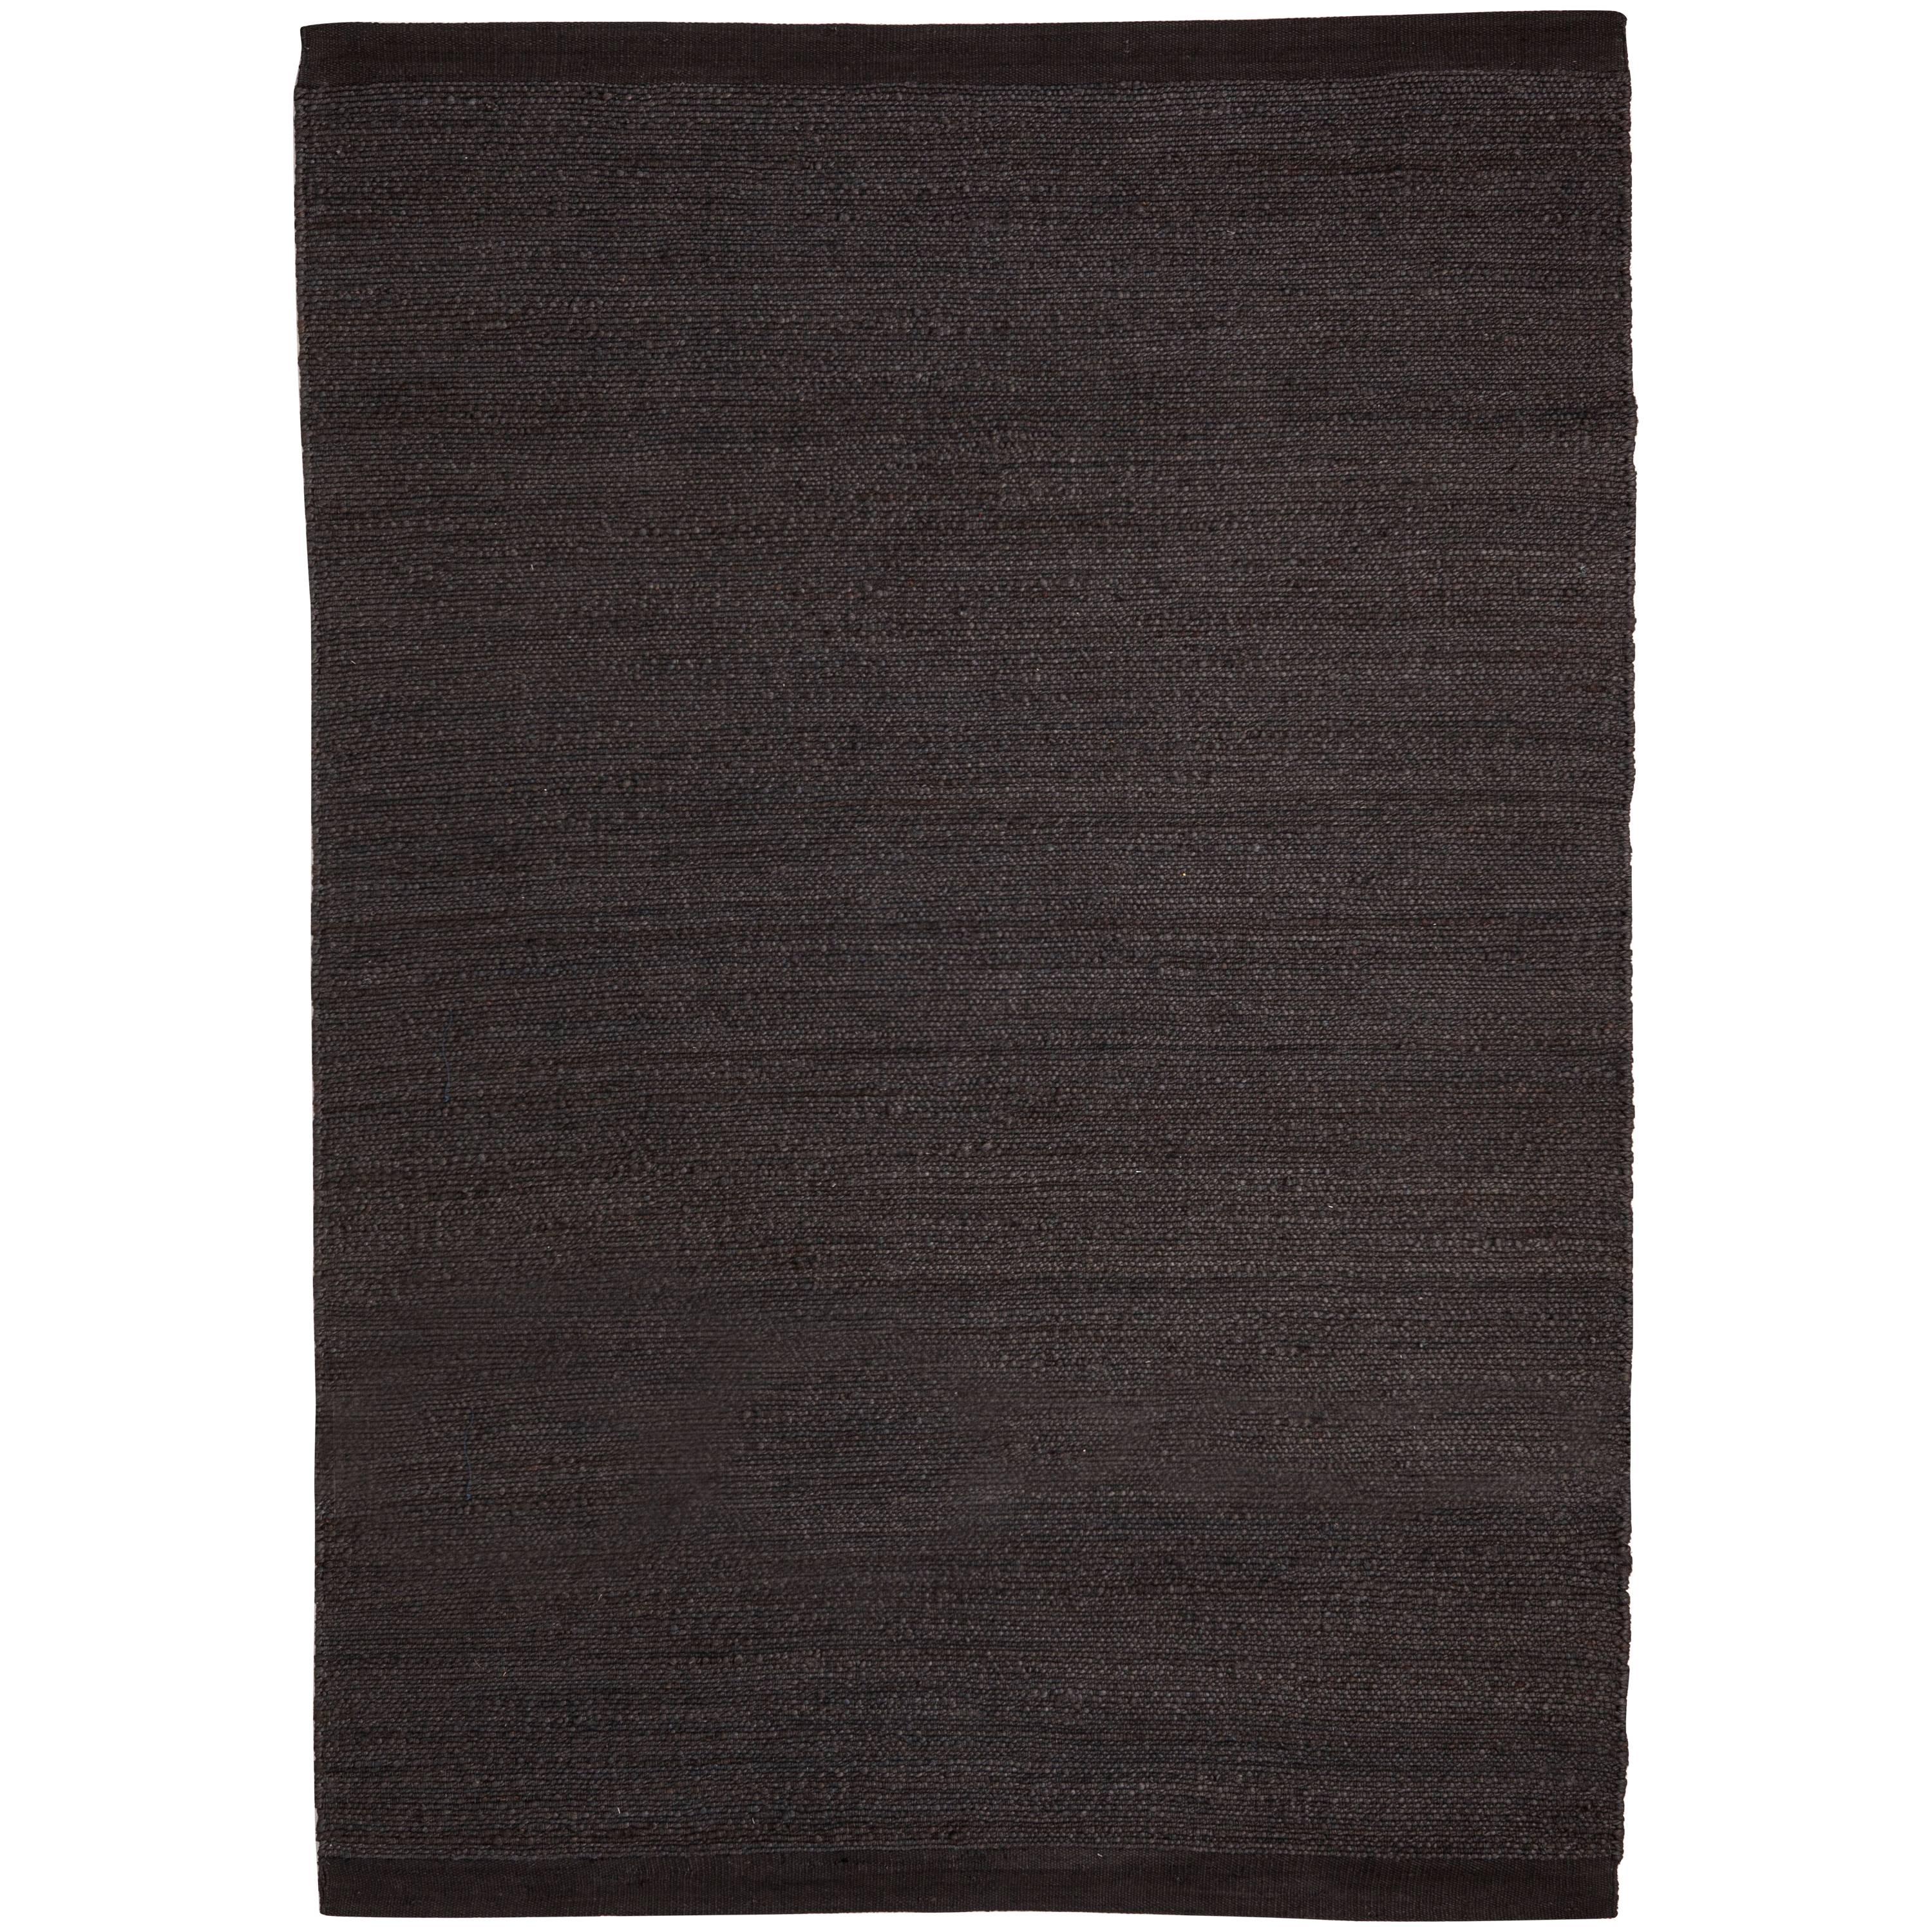 Hand-Loomed Herb Rug by Nani Marquina in Black / Charcoal, Small